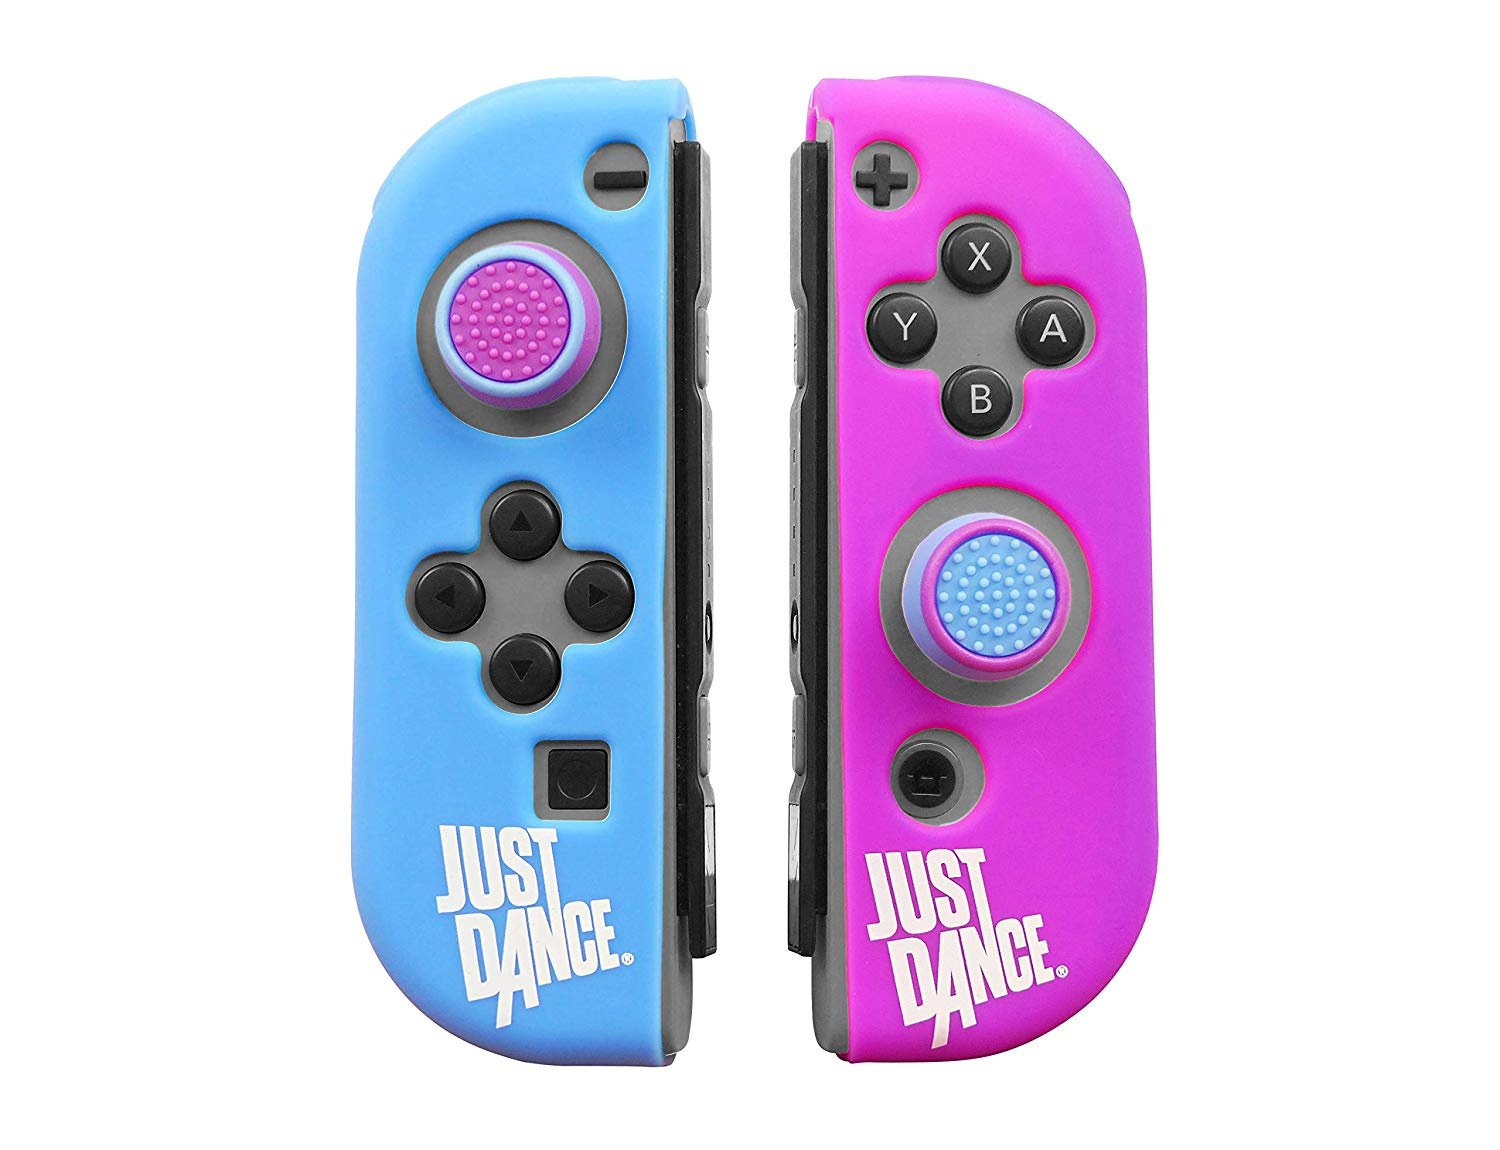 can you play just dance on a nintendo switch